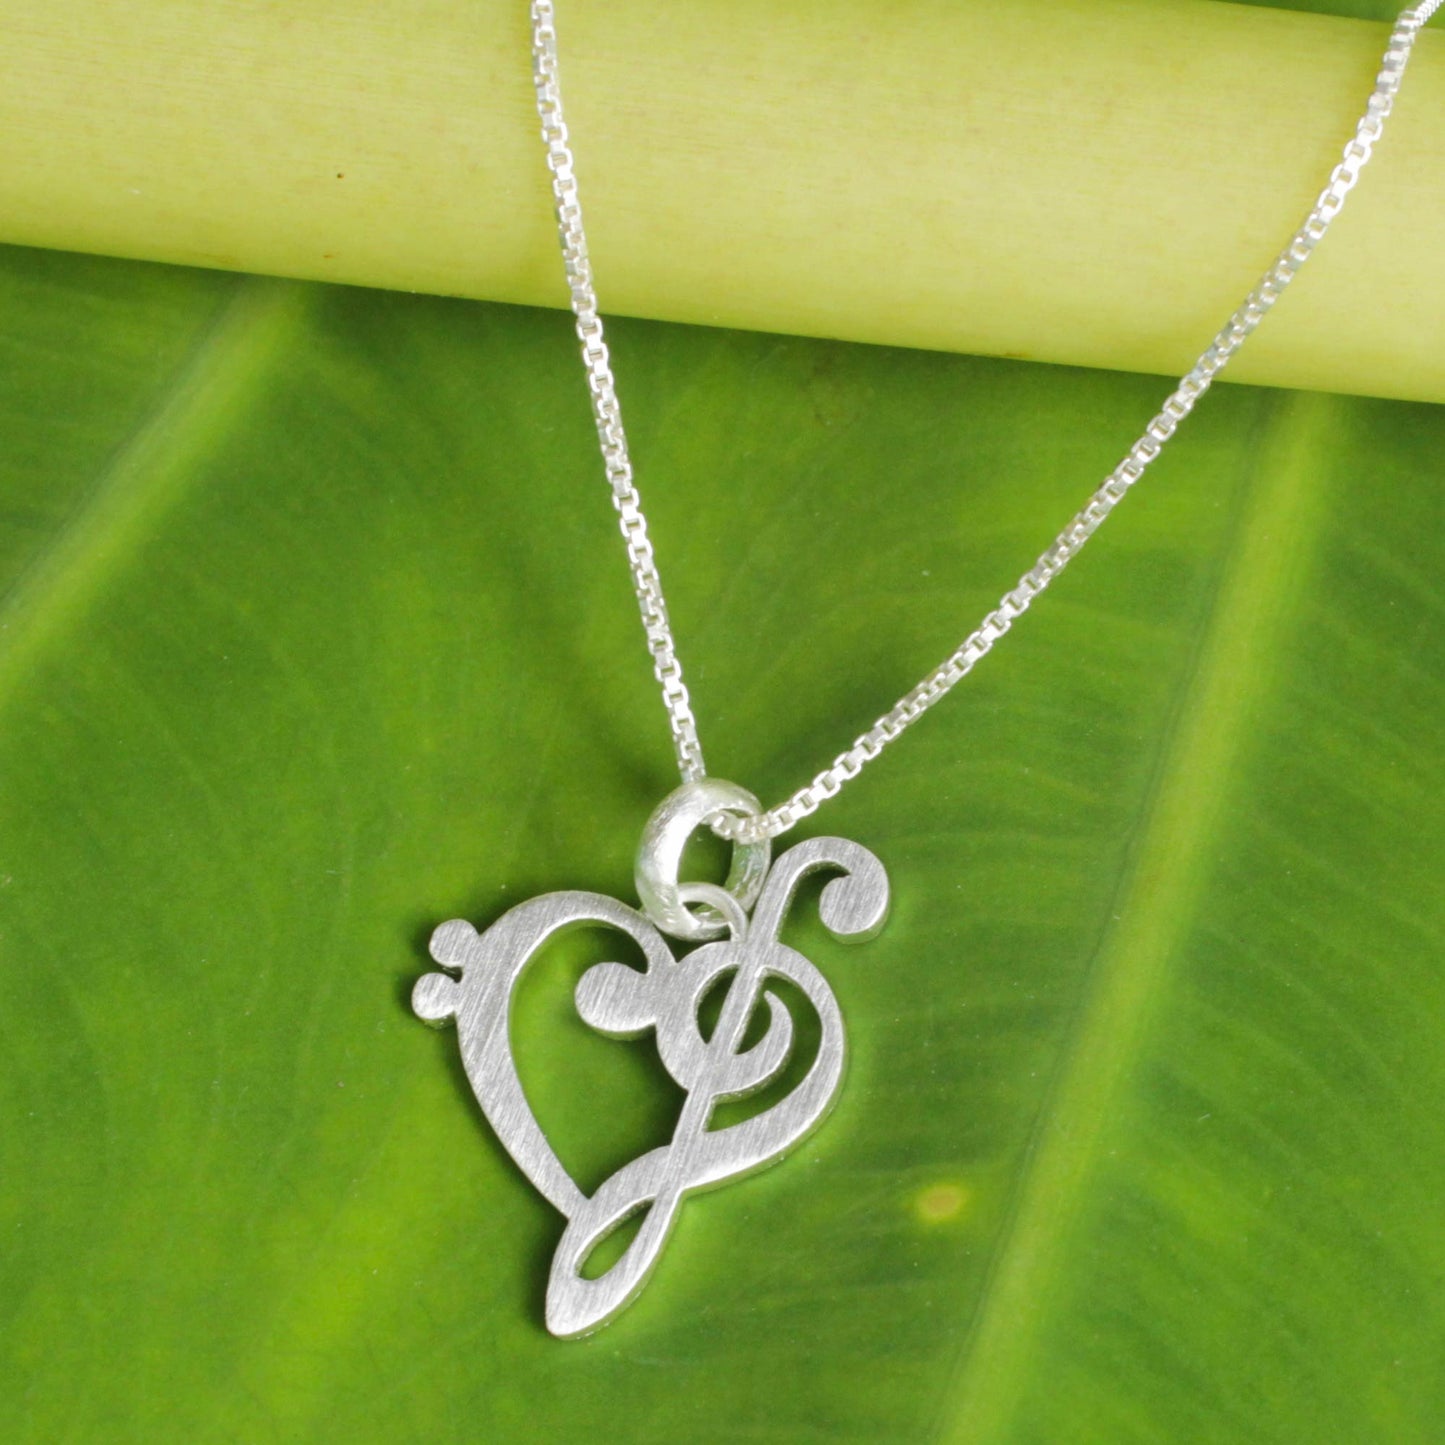 Music of Love Silver Pendant Necklace